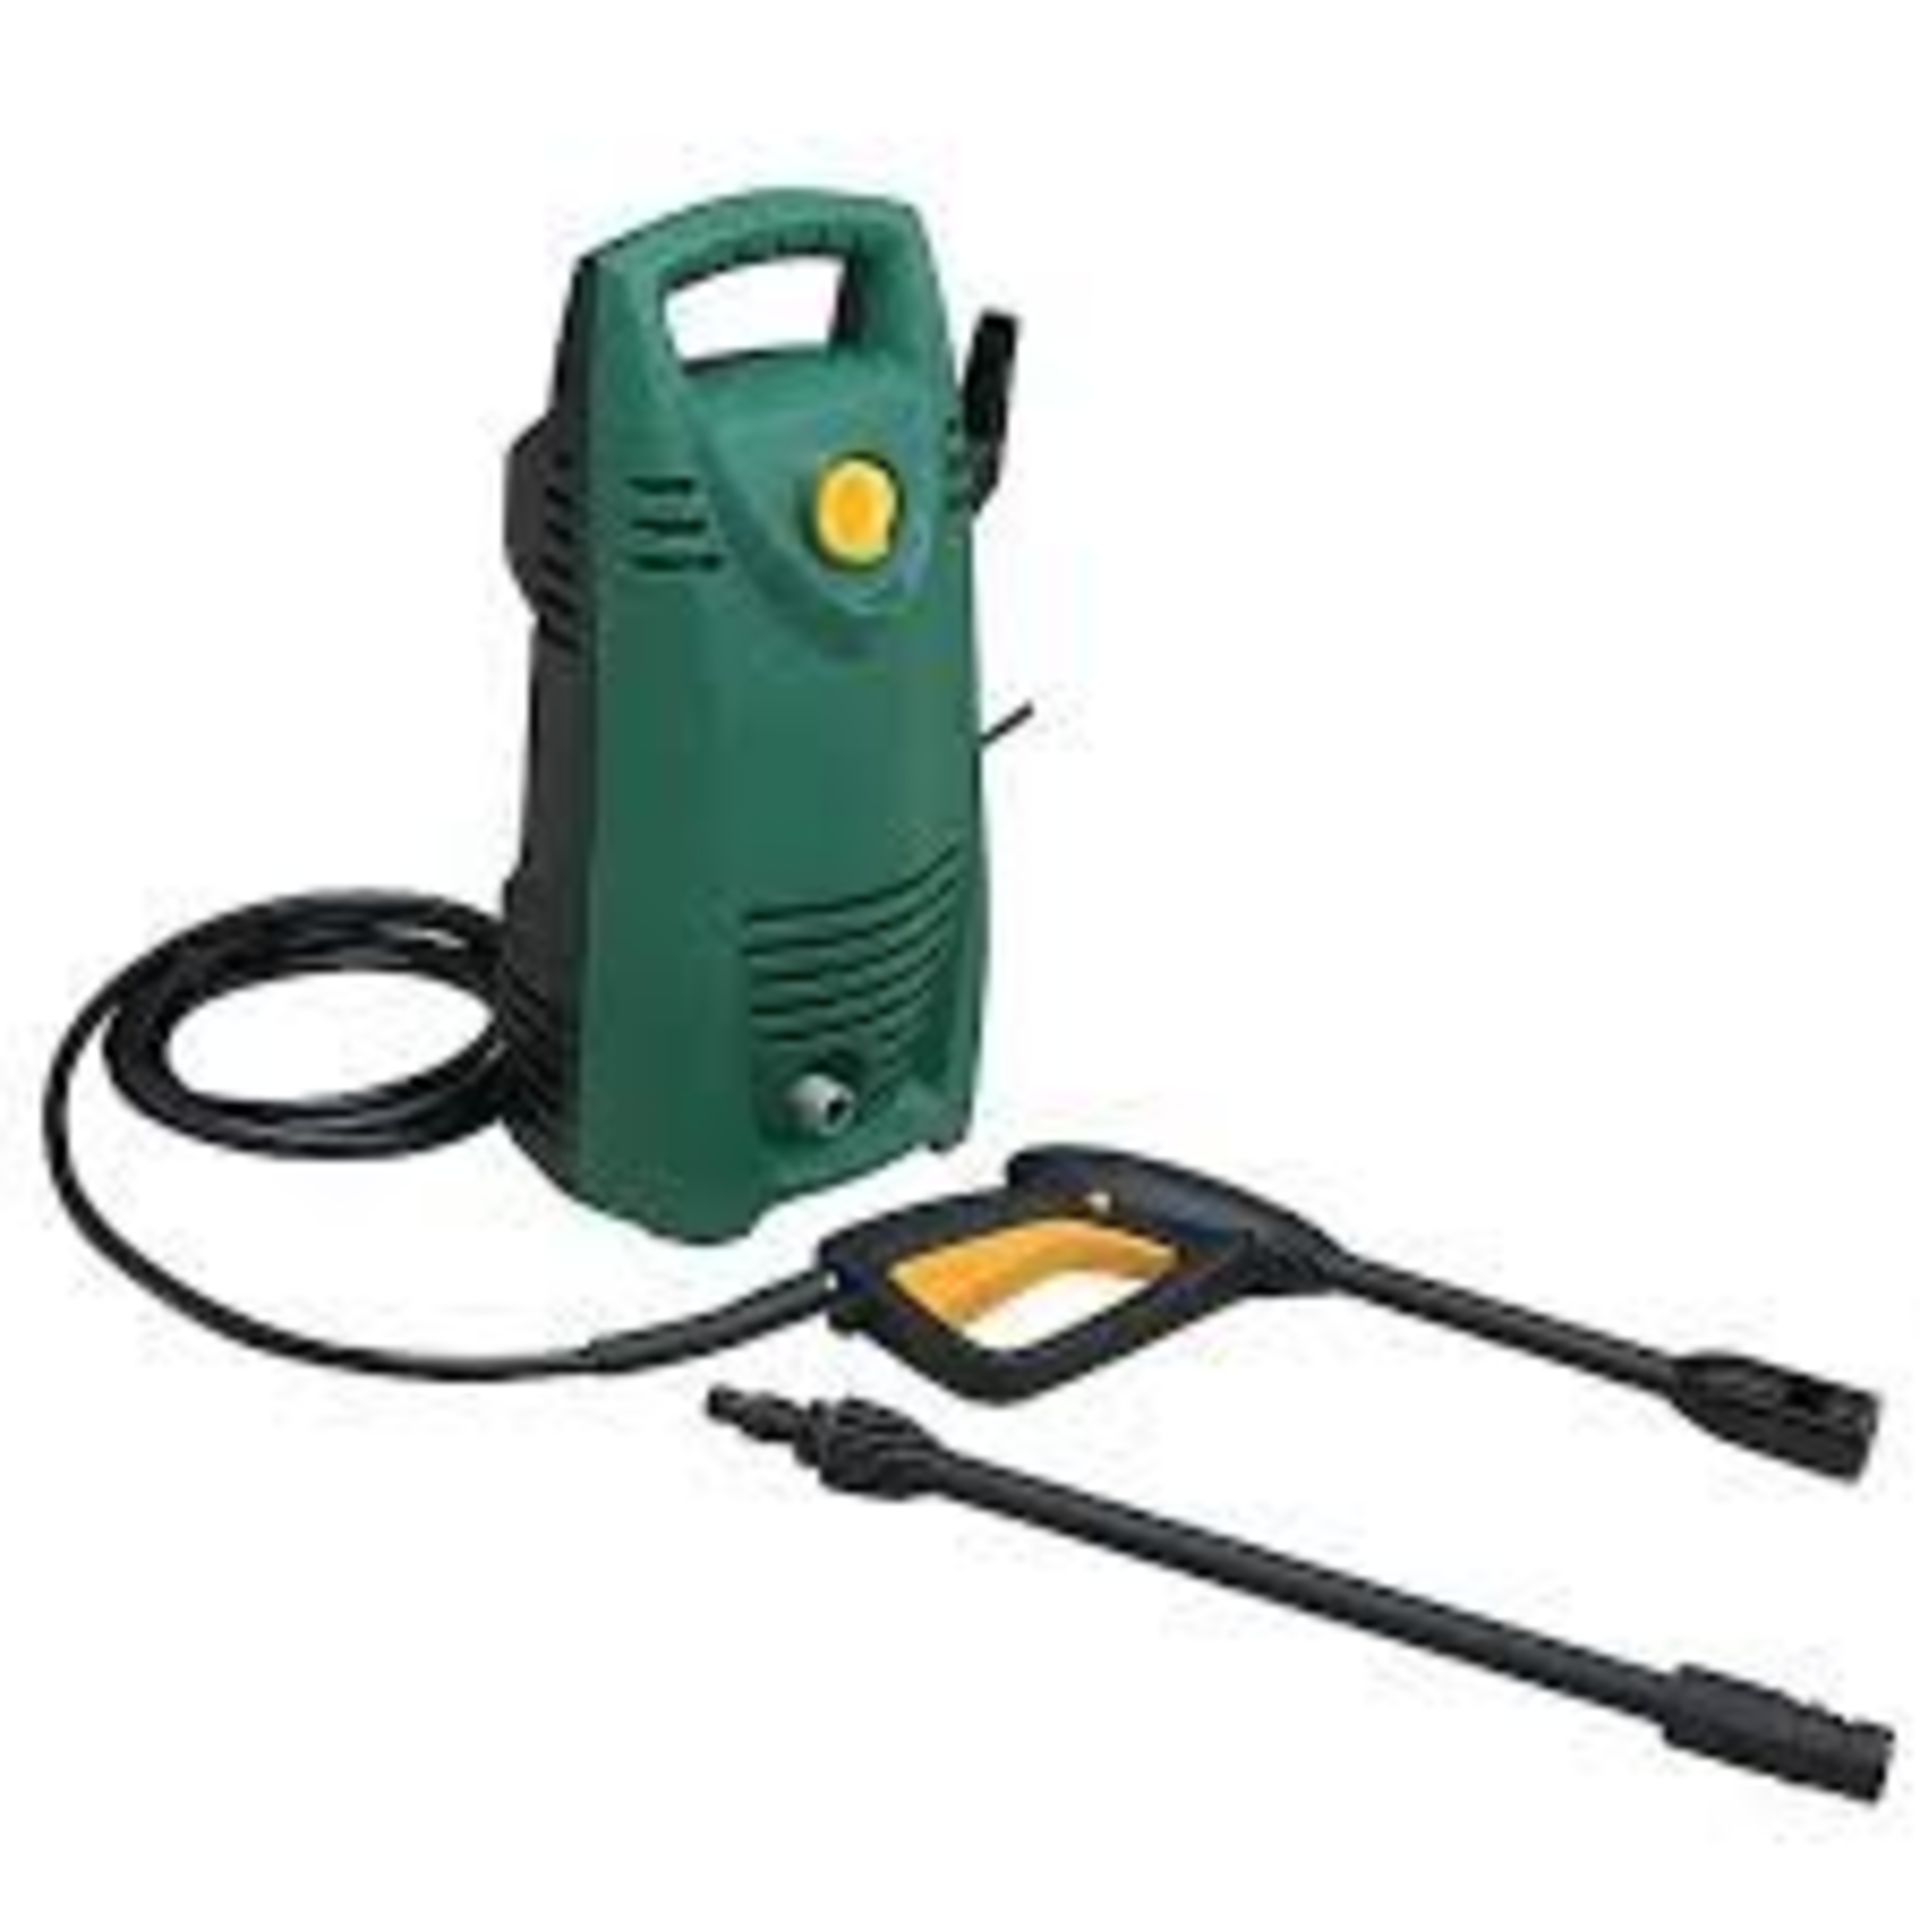 Auto-stop Corded Pressure washer 1.4kW FPHPC100. - PW.